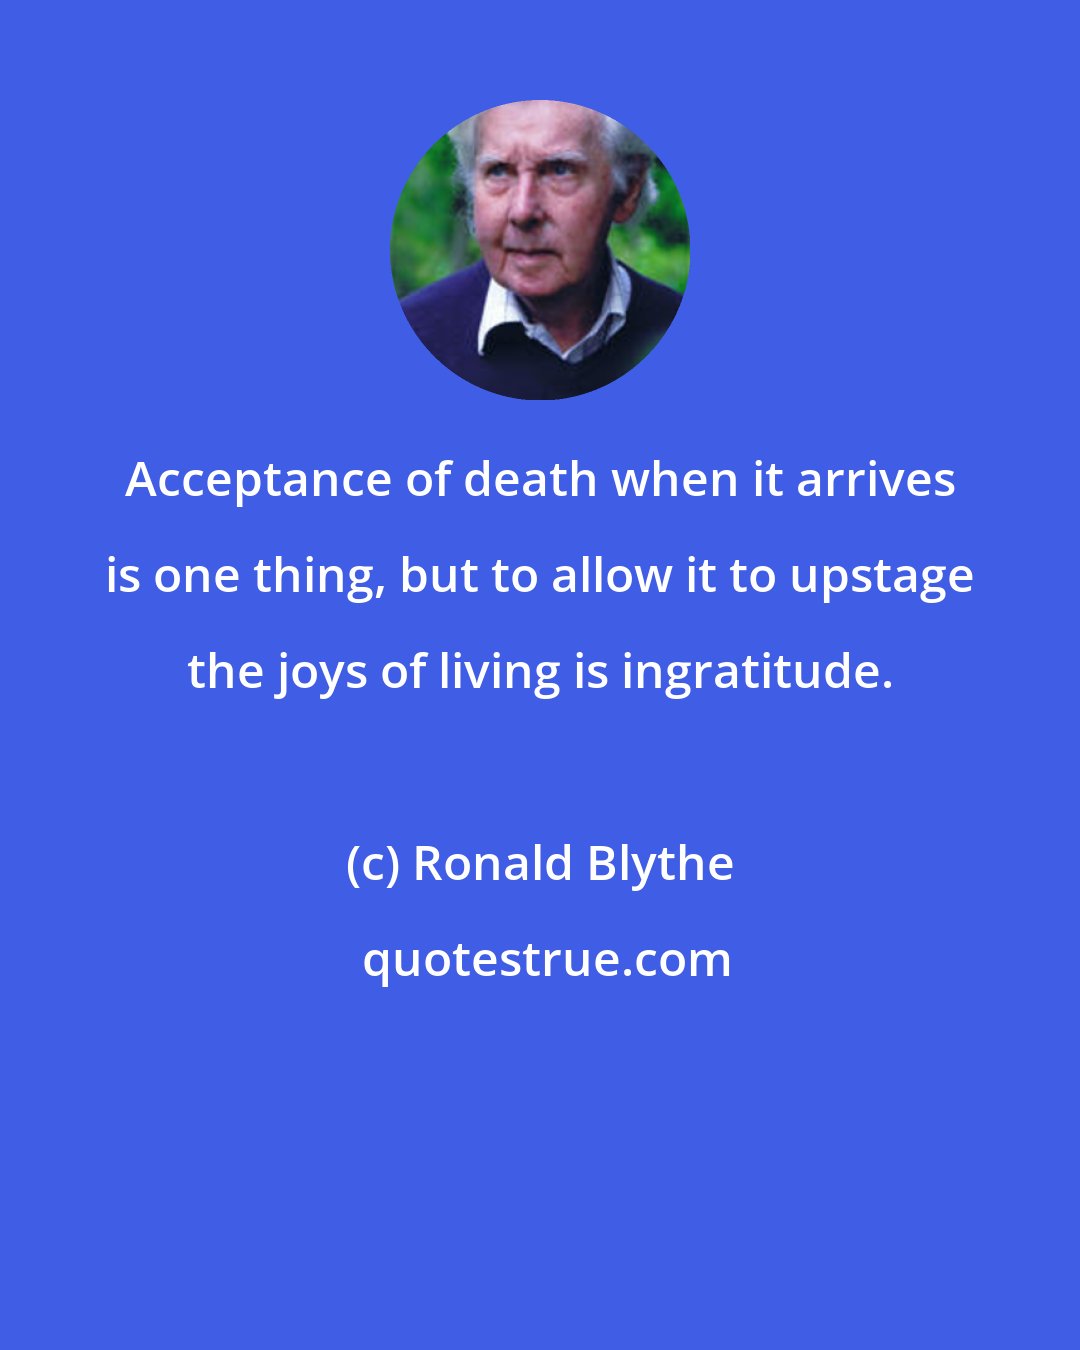 Ronald Blythe: Acceptance of death when it arrives is one thing, but to allow it to upstage the joys of living is ingratitude.